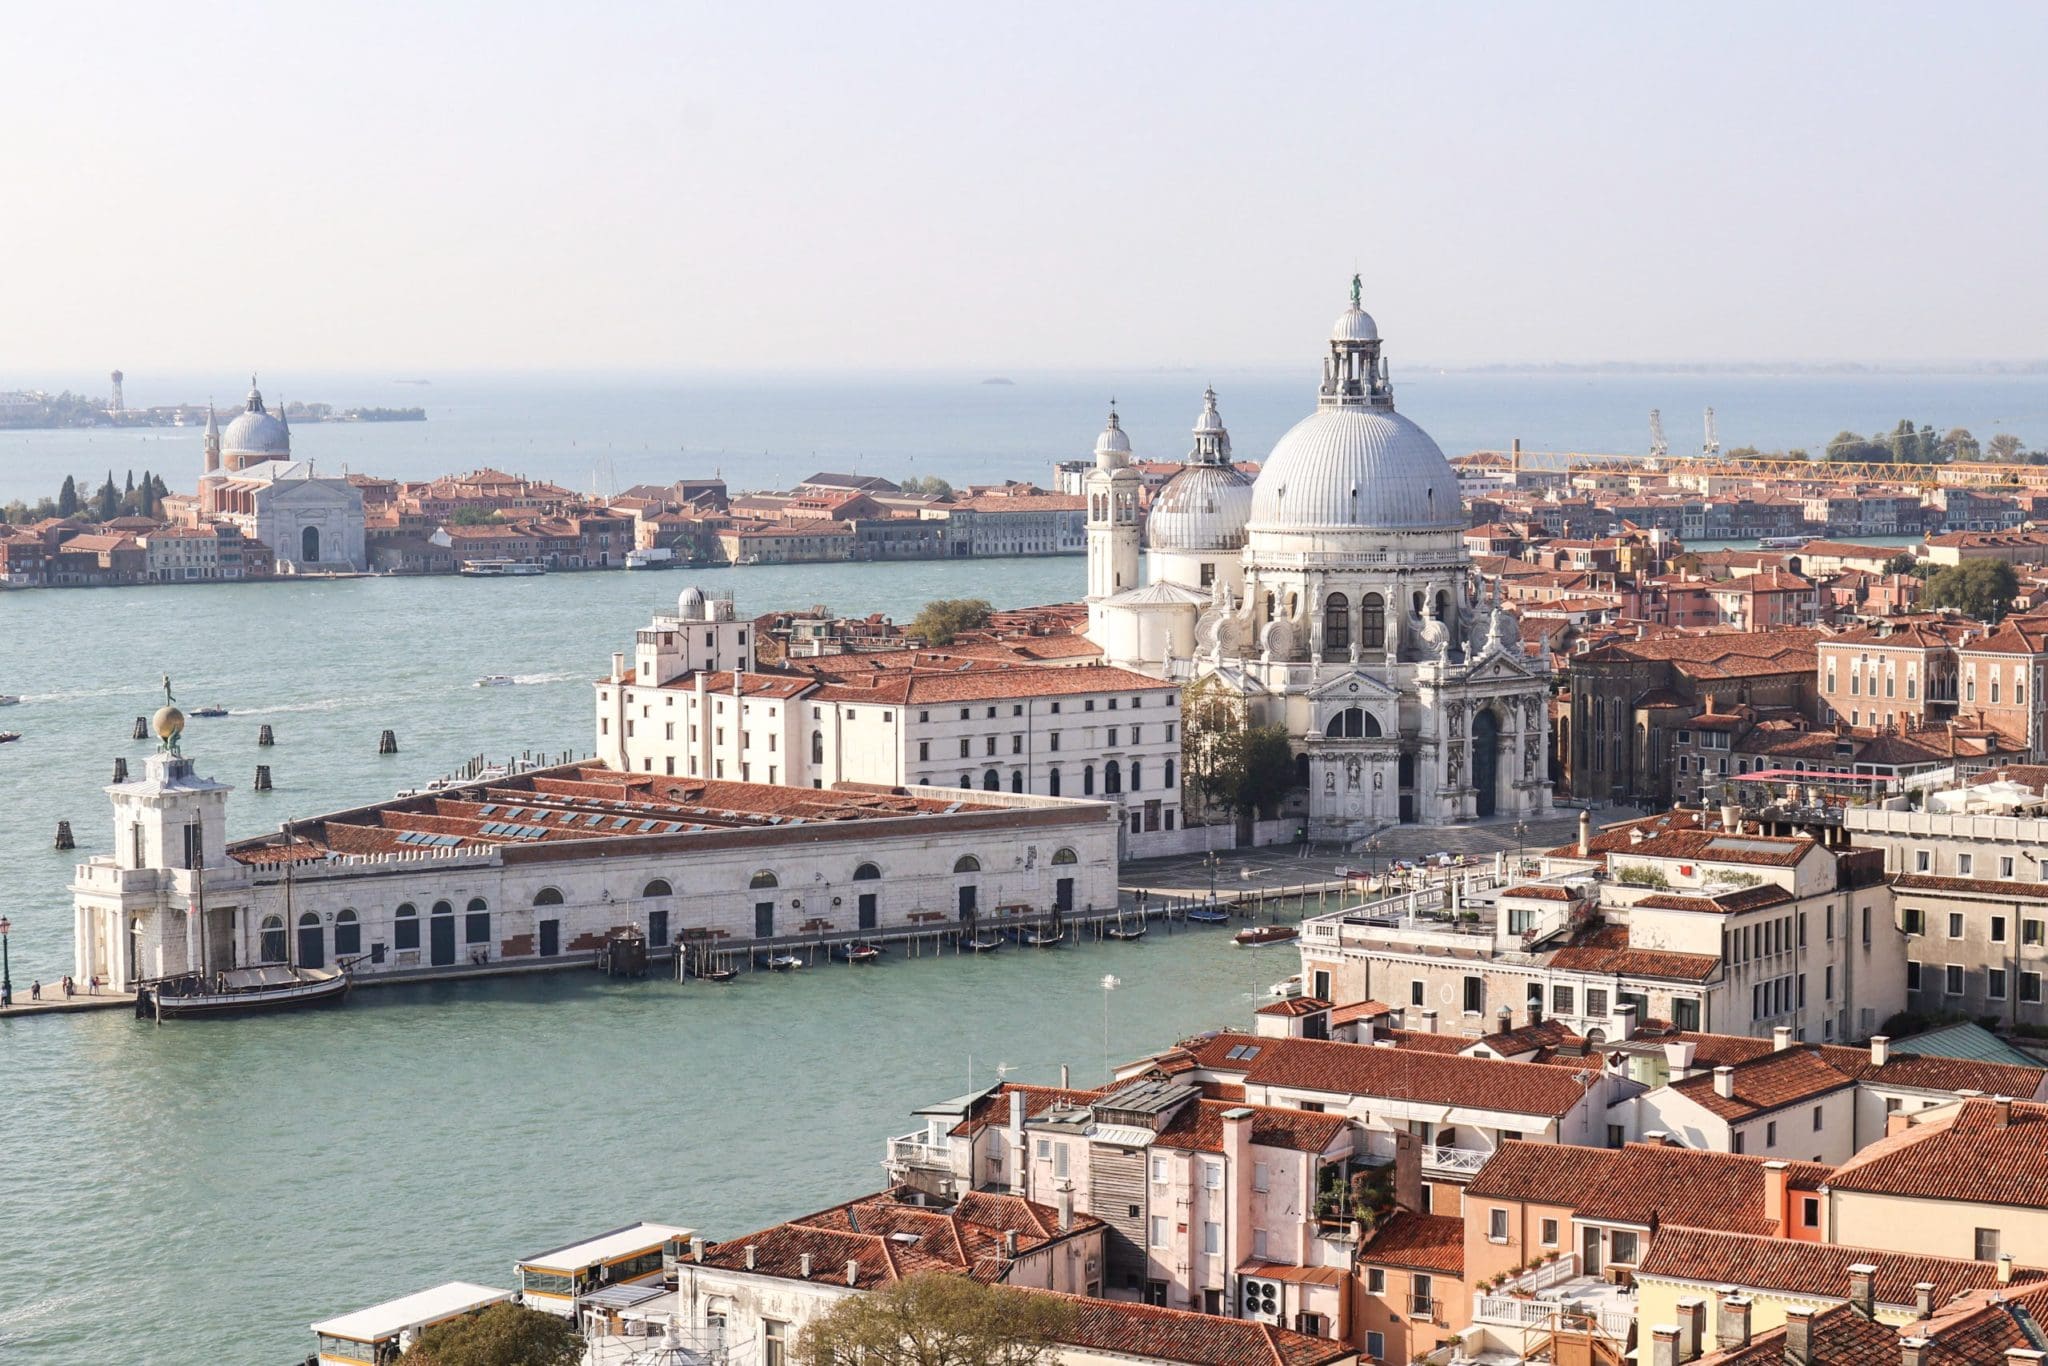 View from the bell tower in Venice Italy